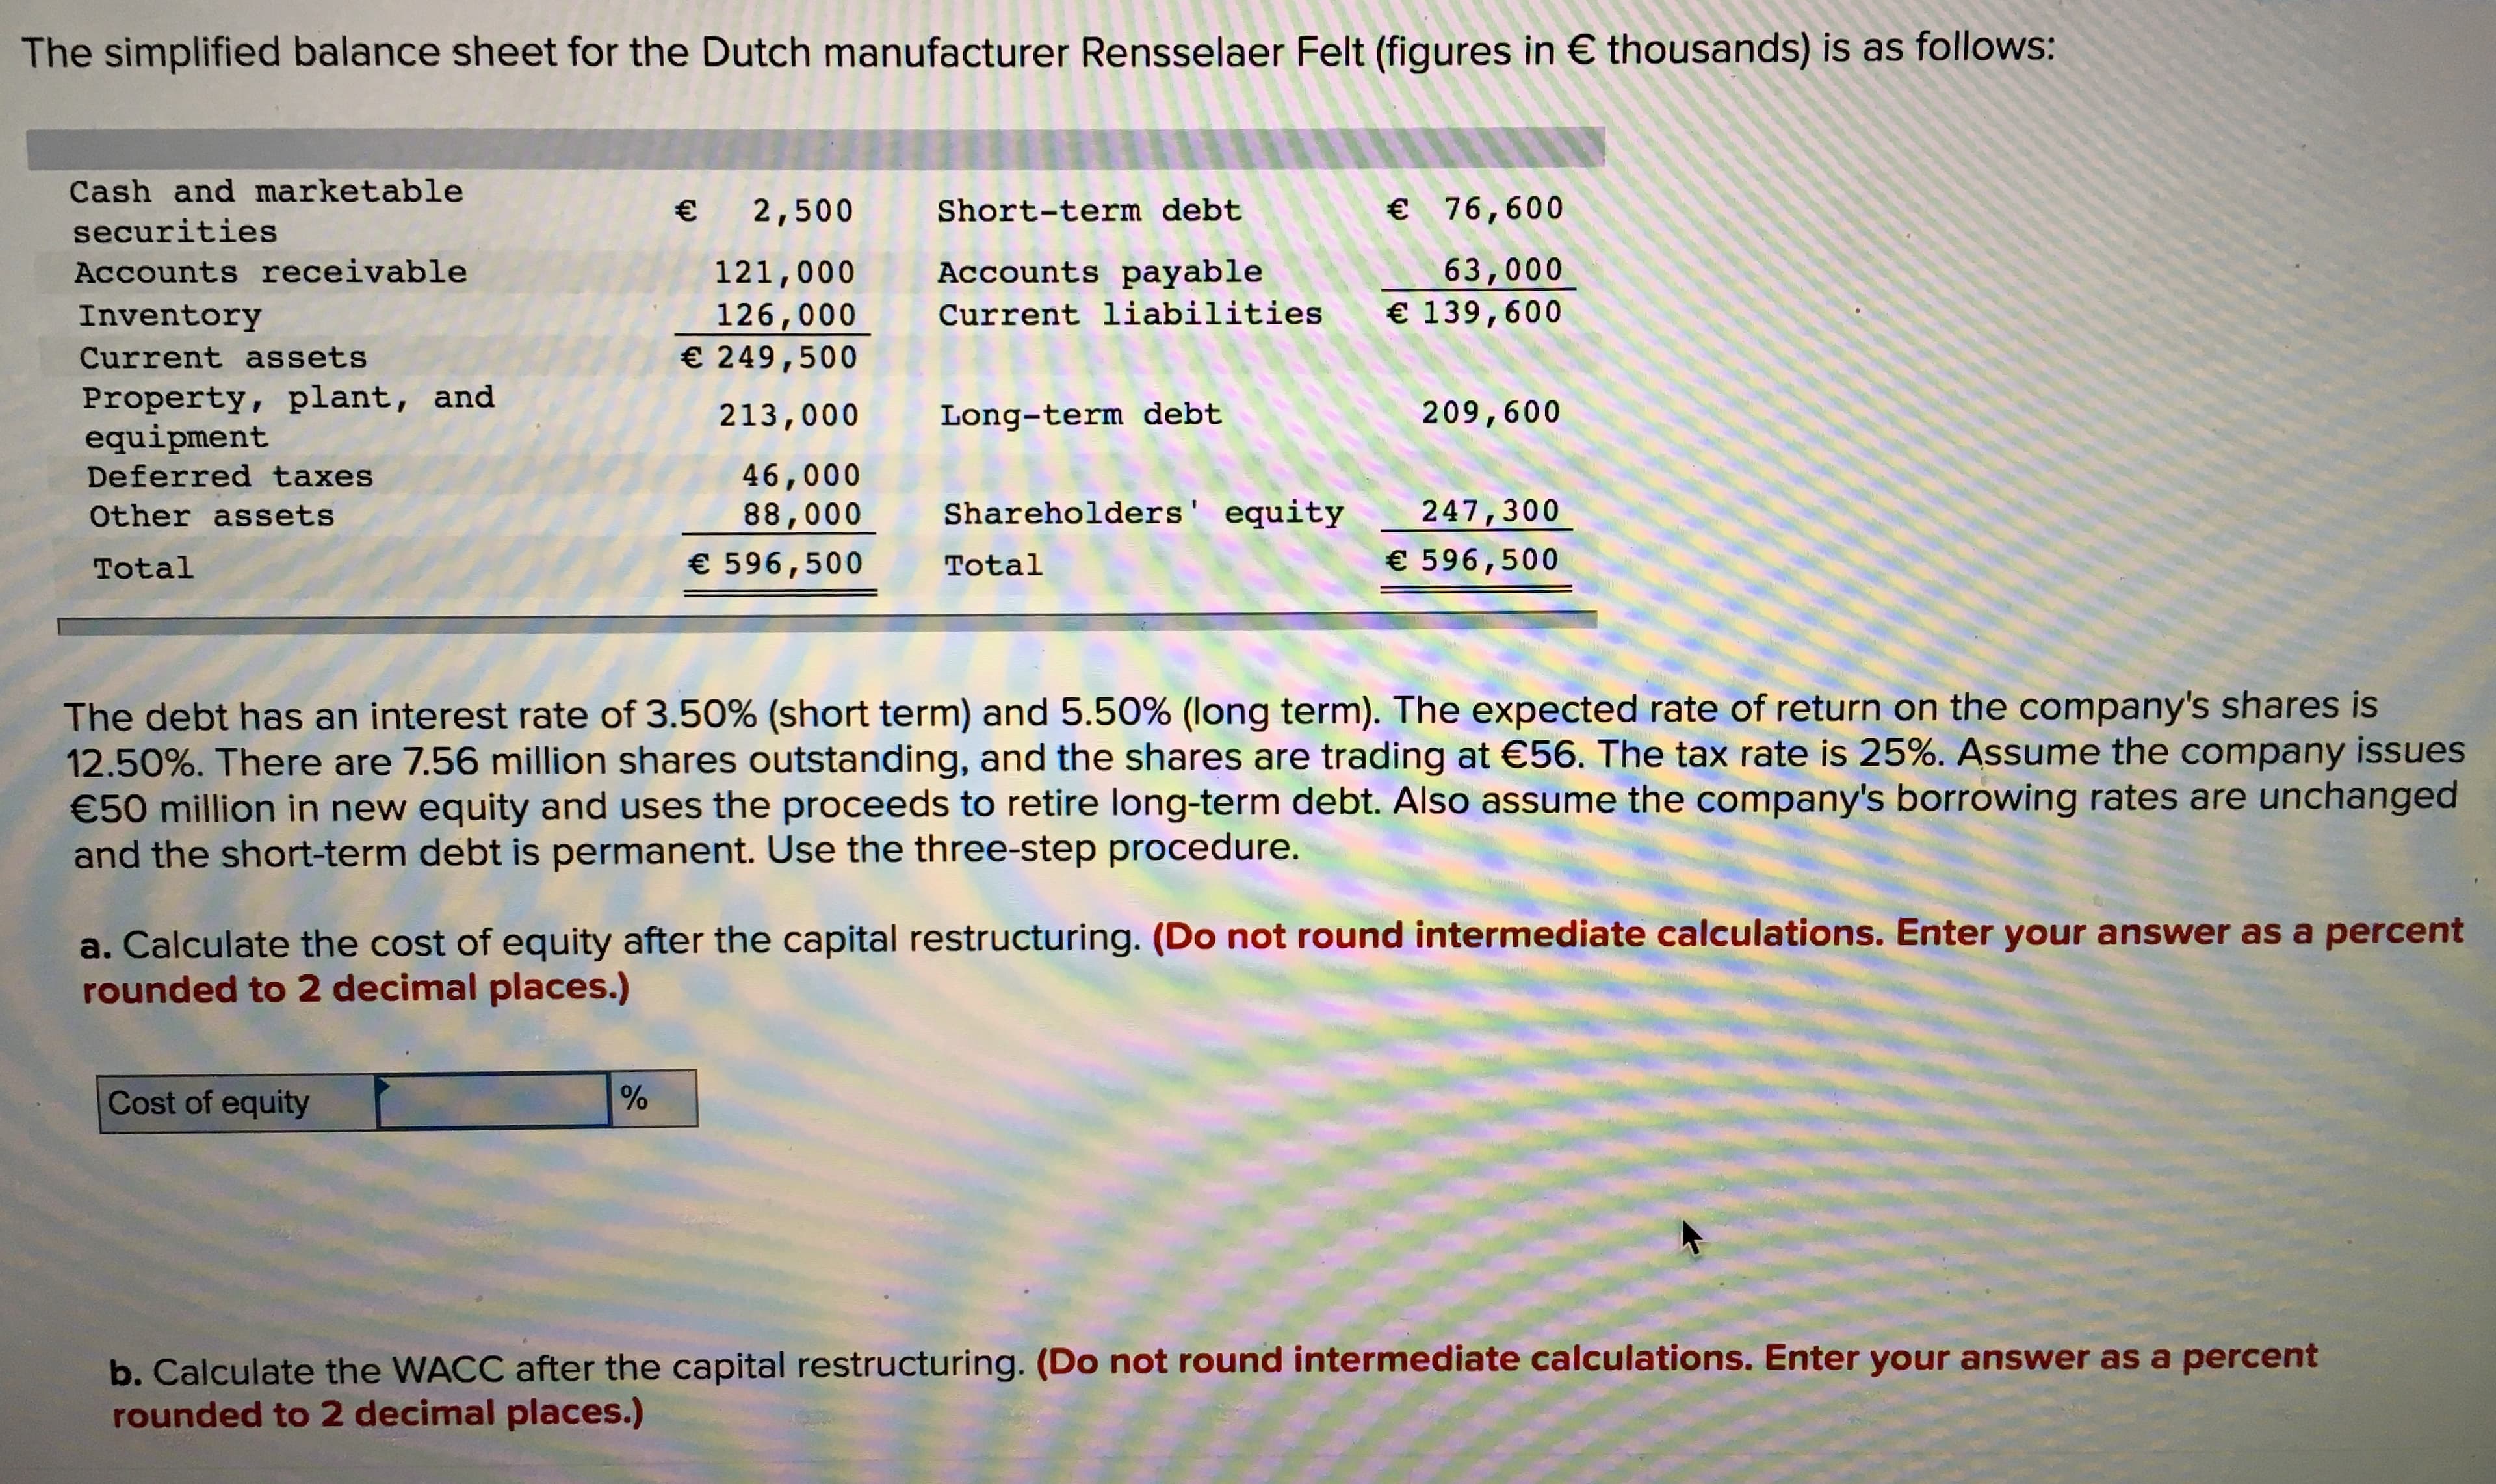 The simplified balance sheet for the Dutch manufacturer Rensselaer Felt (figures in € thousands) is as follows:
Cash and marketable
€ 76,600
Short-term debt
2,500
securities
63,000
€ 139,600
Accounts receivable
121,000
126,000
Accounts payable
Inventory
Current liabilities
€ 249,500
Current assets
Property, plant, and
equipment
209,600
213,000
Long-term debt
46,000
88,000
Deferred taxes
Shareholders' equity
247,300
Other assets
€ 596,500
€ 596,500
Total
Total
The debt has an interest rate of 3.50% (short term) and 5.50% (long term). The expected rate of return on the company's shares is
12.50%. There are 7.56 million shares outstanding, and the shares are trading at €56. The tax rate is 25%. Assume the company issues
50 million in new equity and uses the proceeds to retire long-term debt. Also assume the company's borrowing rates are unchanged
and the short-term debt is permanent. Use the three-step procedure.
a. Calculate the cost of equity after the capital restructuring. (Do not round intermediate calculations. Enter your answer as a percent
rounded to 2 decimal places.)
Cost of equity
b. Calculate the WACC after the capital restructuring. (Do not round intermediate calculations. Enter your answer as a percent
rounded to 2 decimal places.)
96
